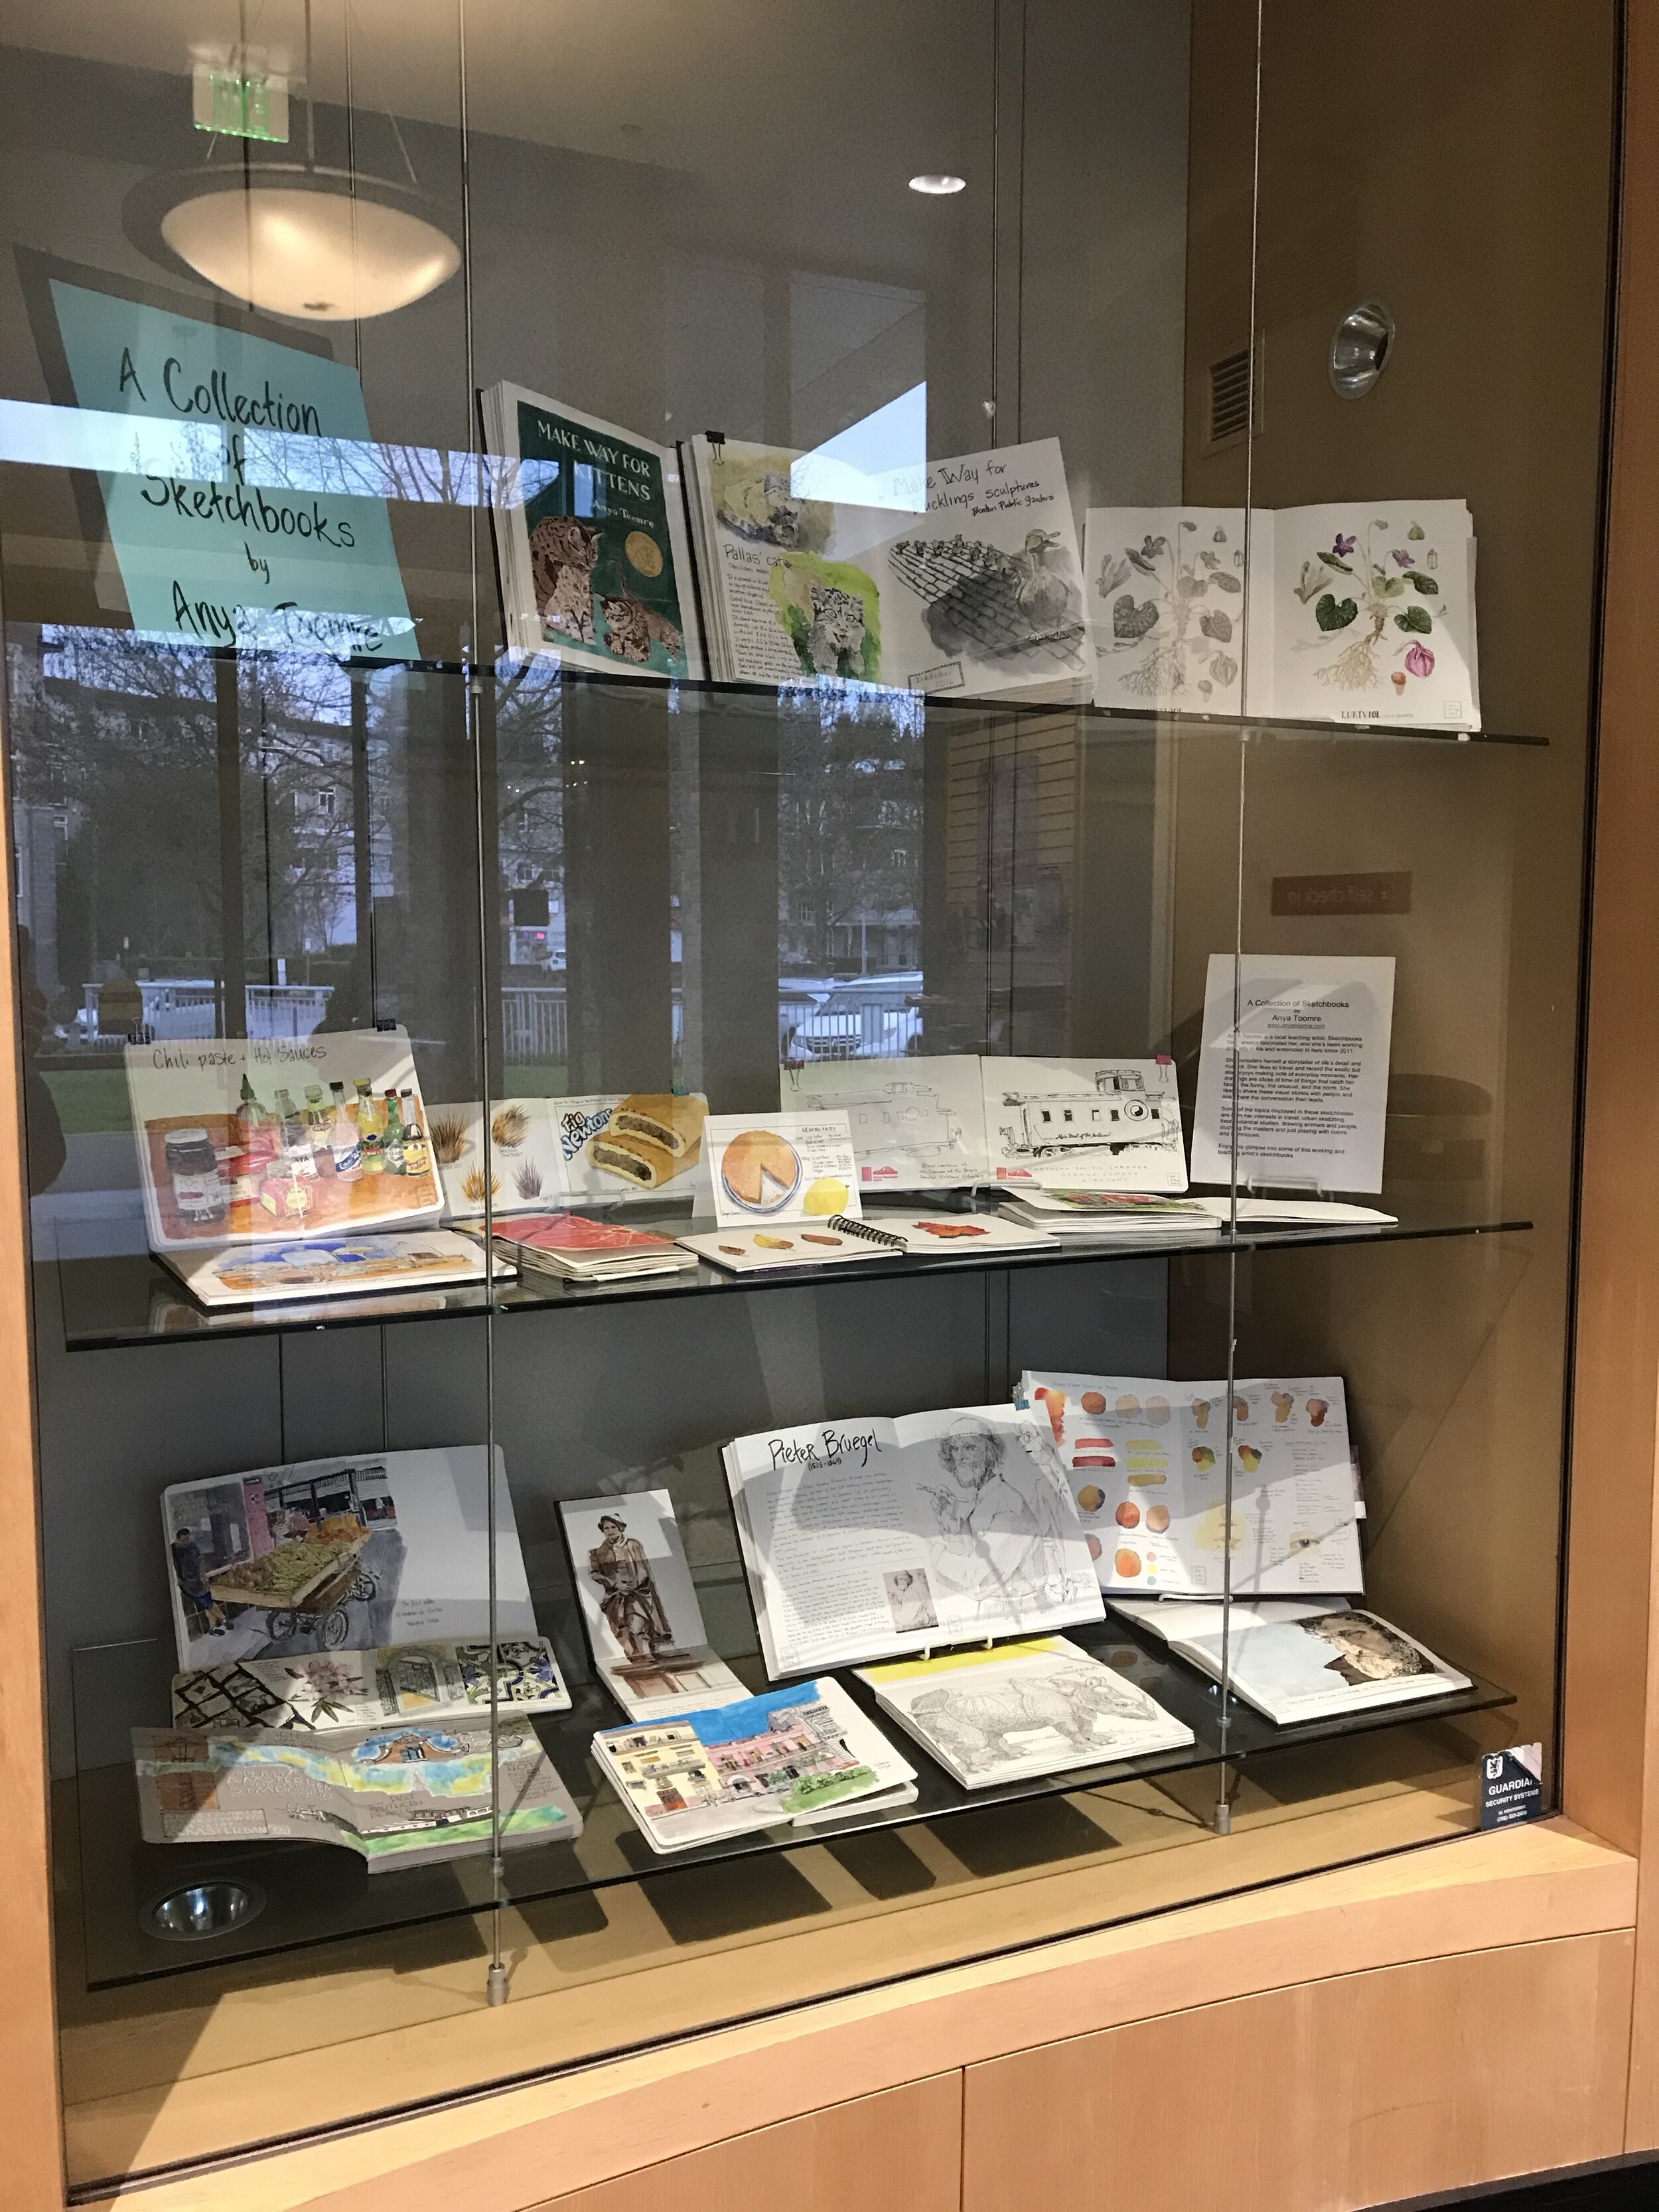 Display of my sketchbooks at the Kirkland Library